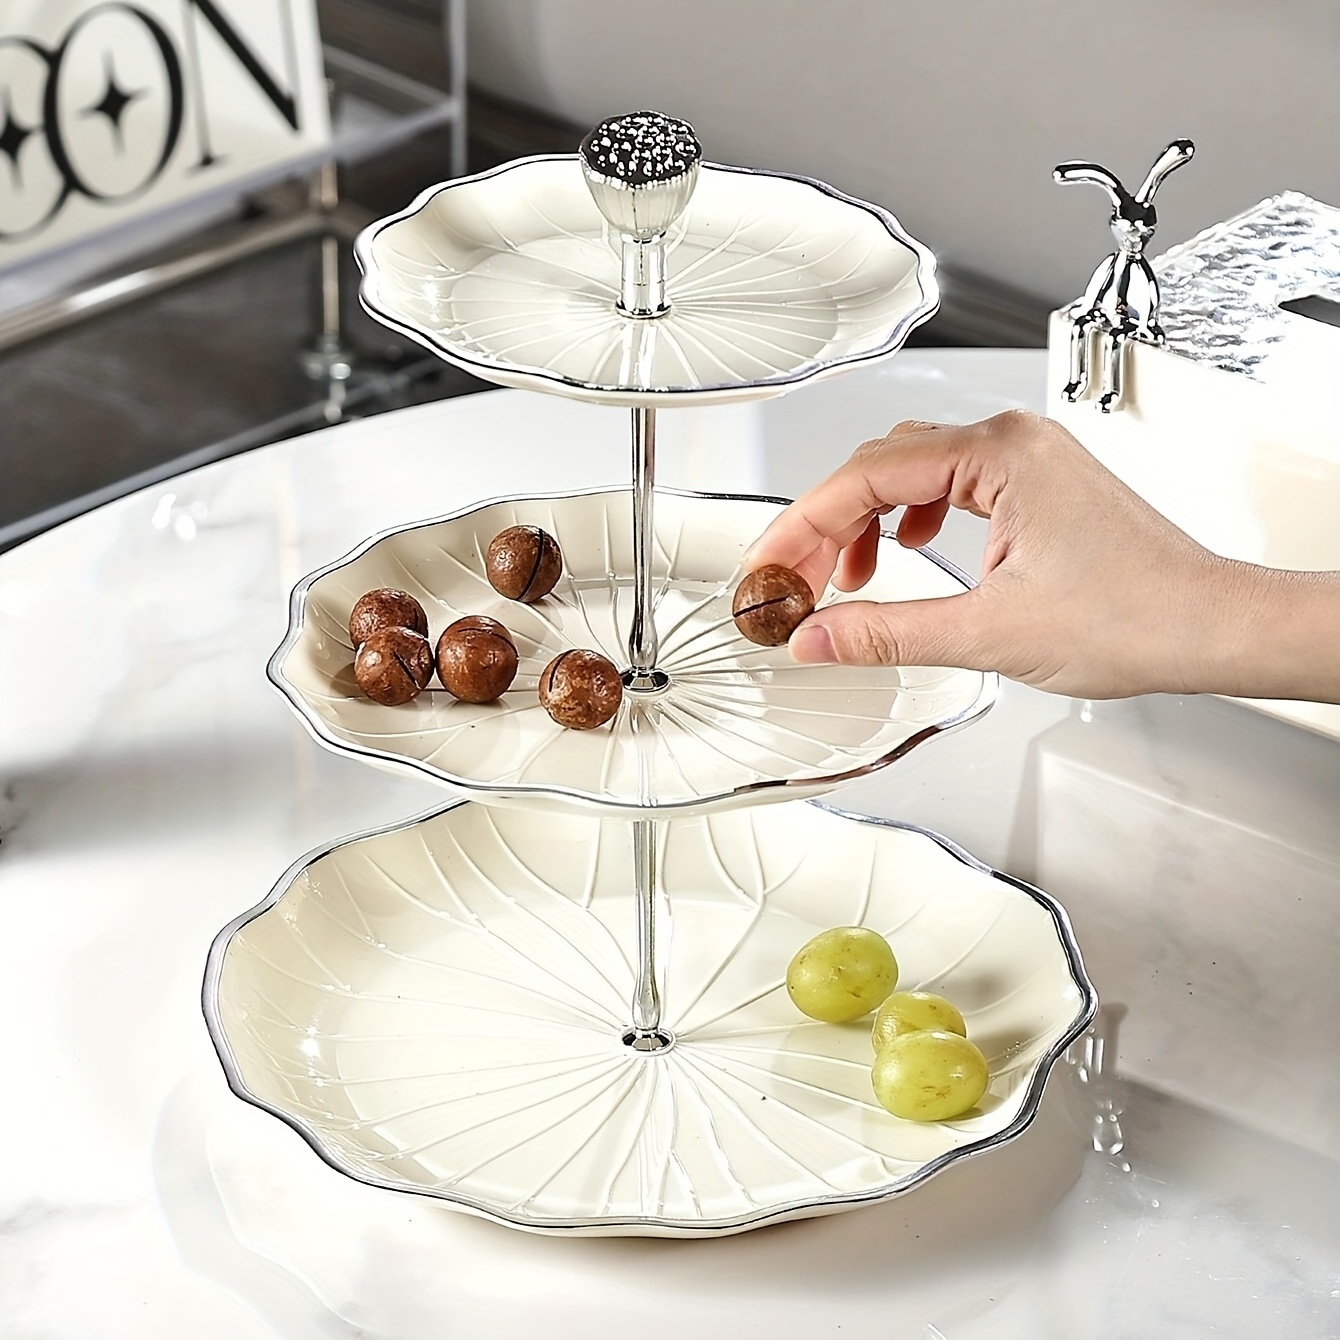 CAKE STAND - TABLE ACCESSORIES - Blanc MariClo' Milano